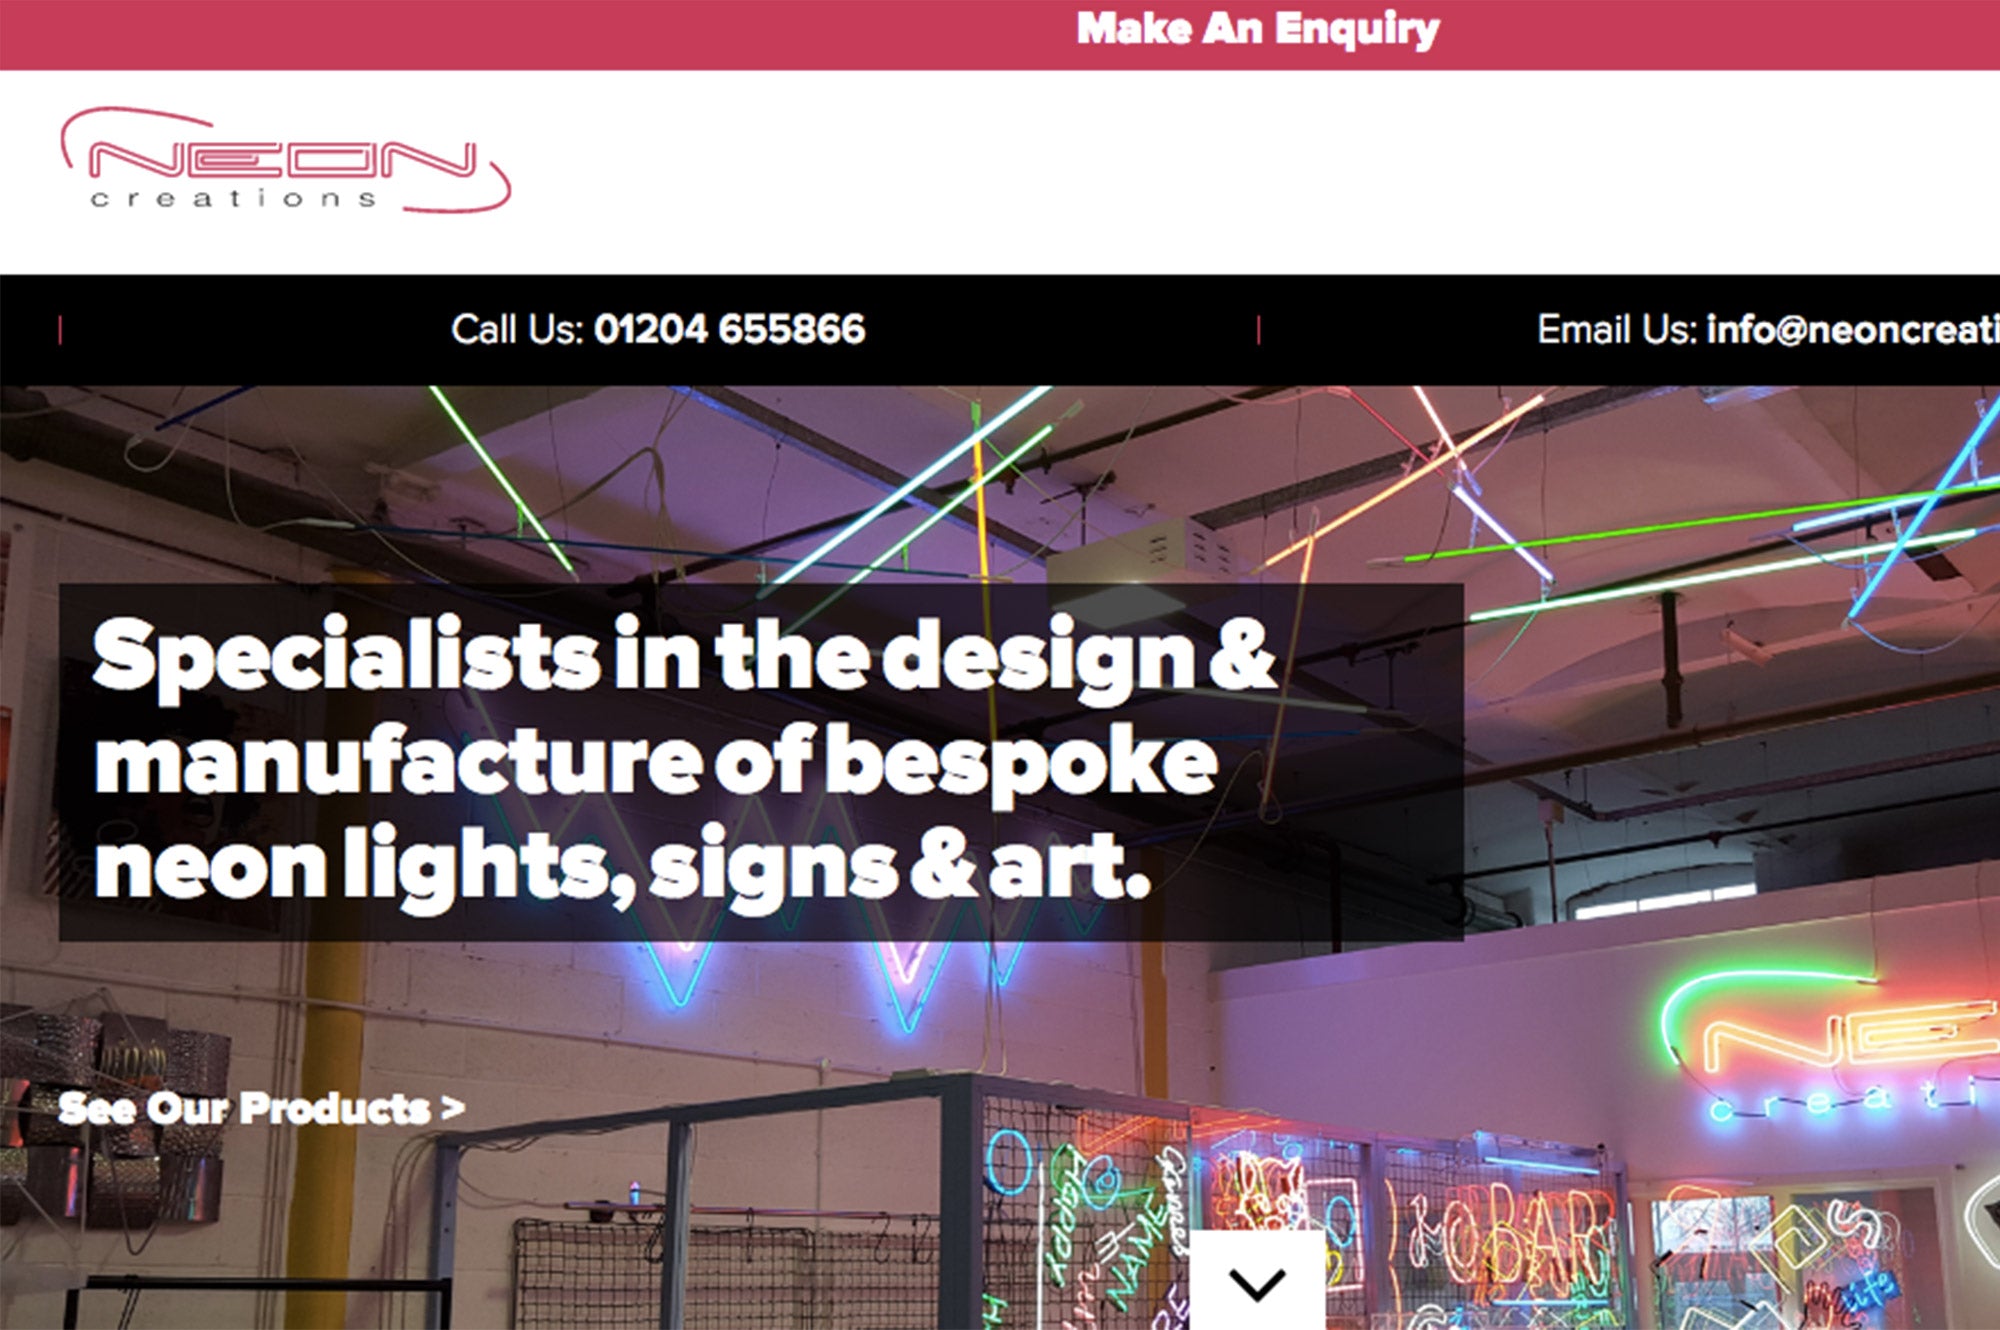 Neon Light On: Our New Website